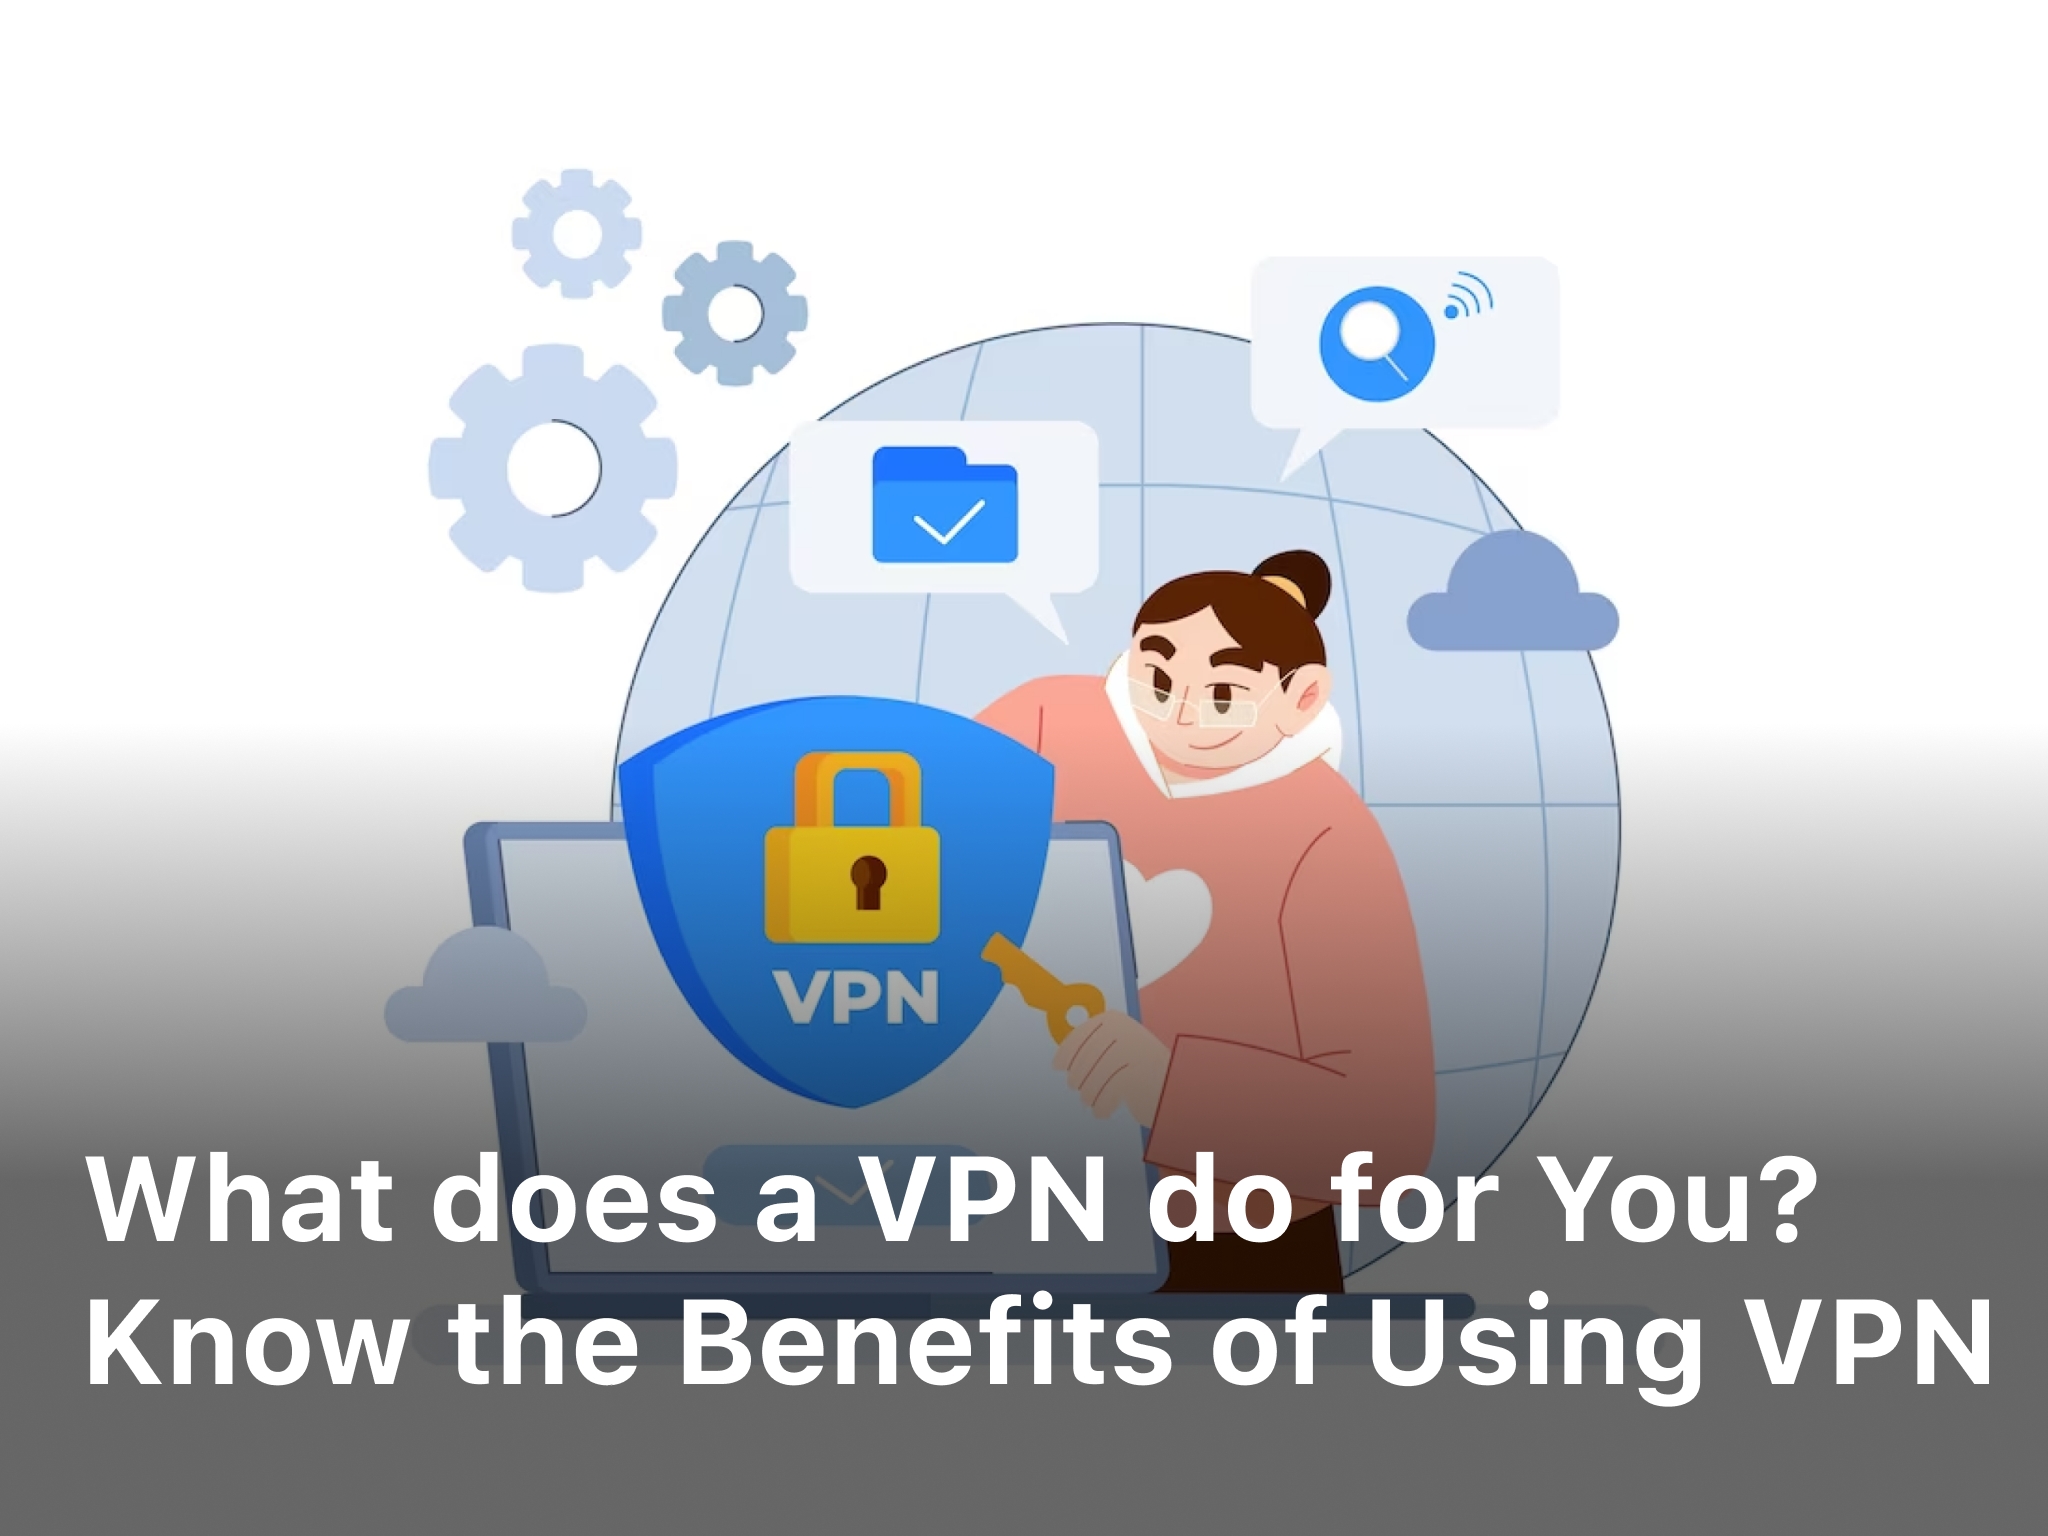 Know the benefits using VPN